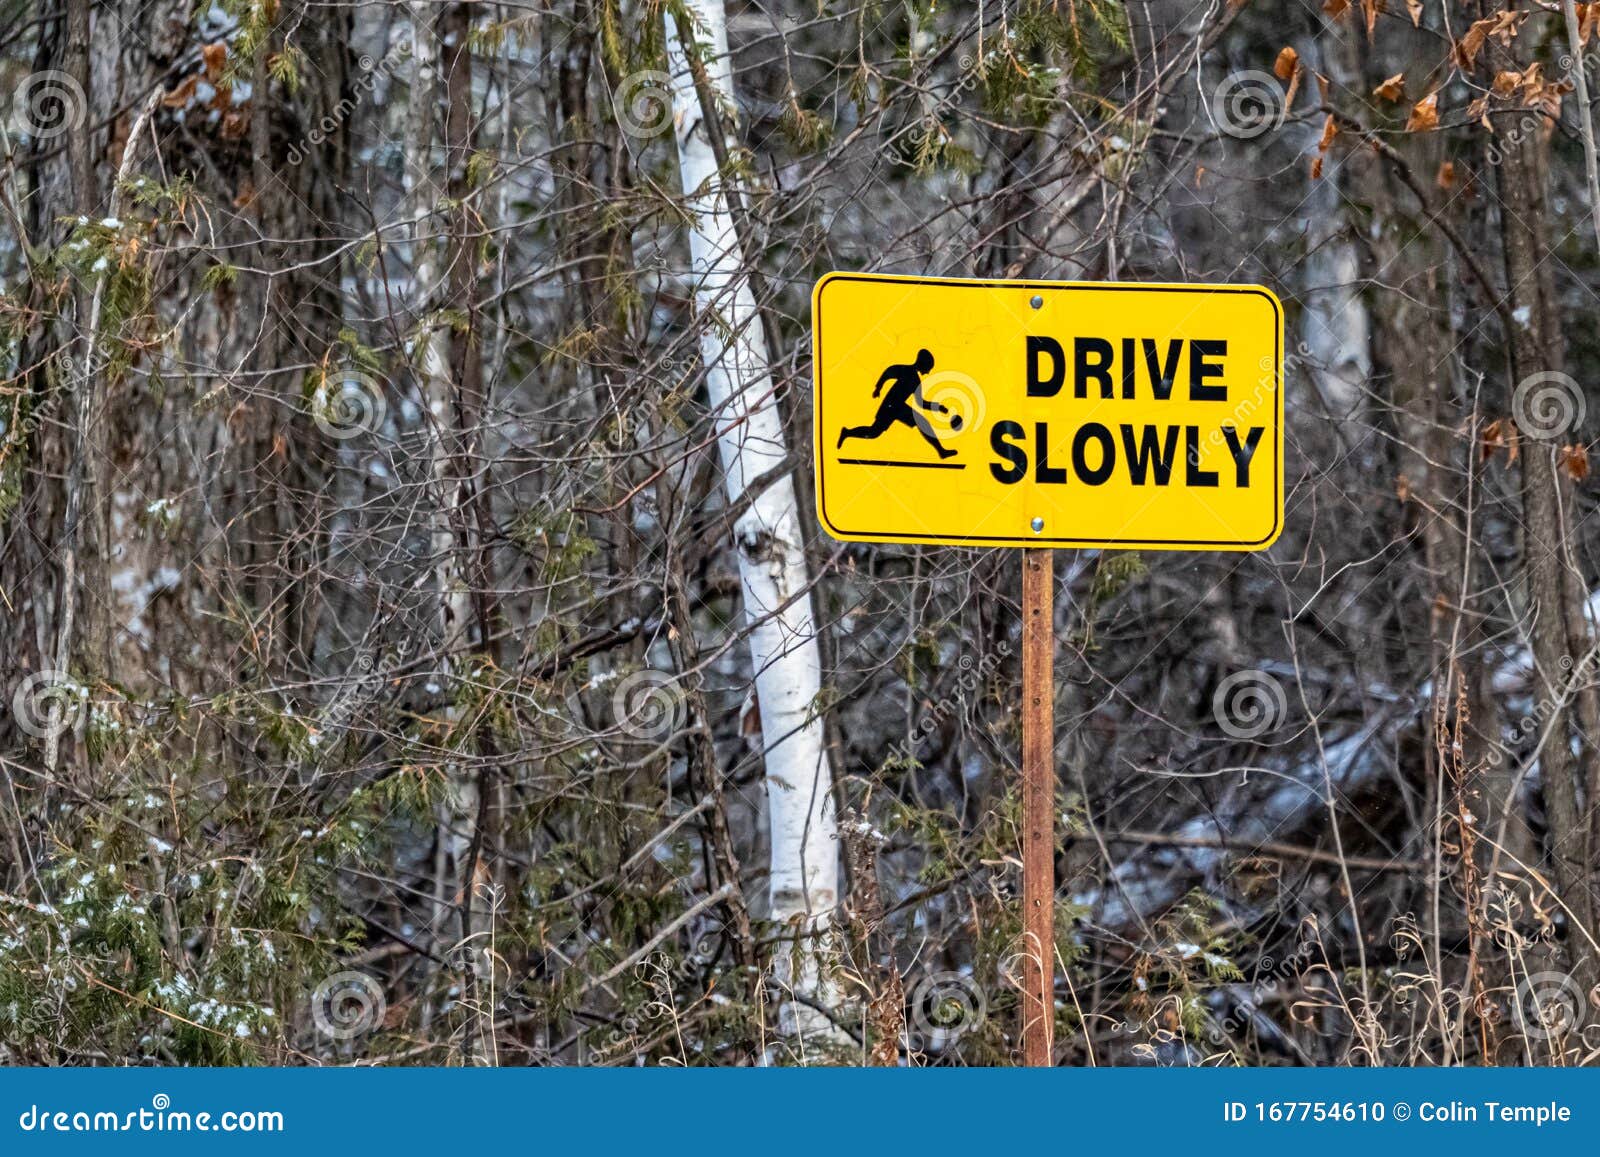 cottage country road sign warns